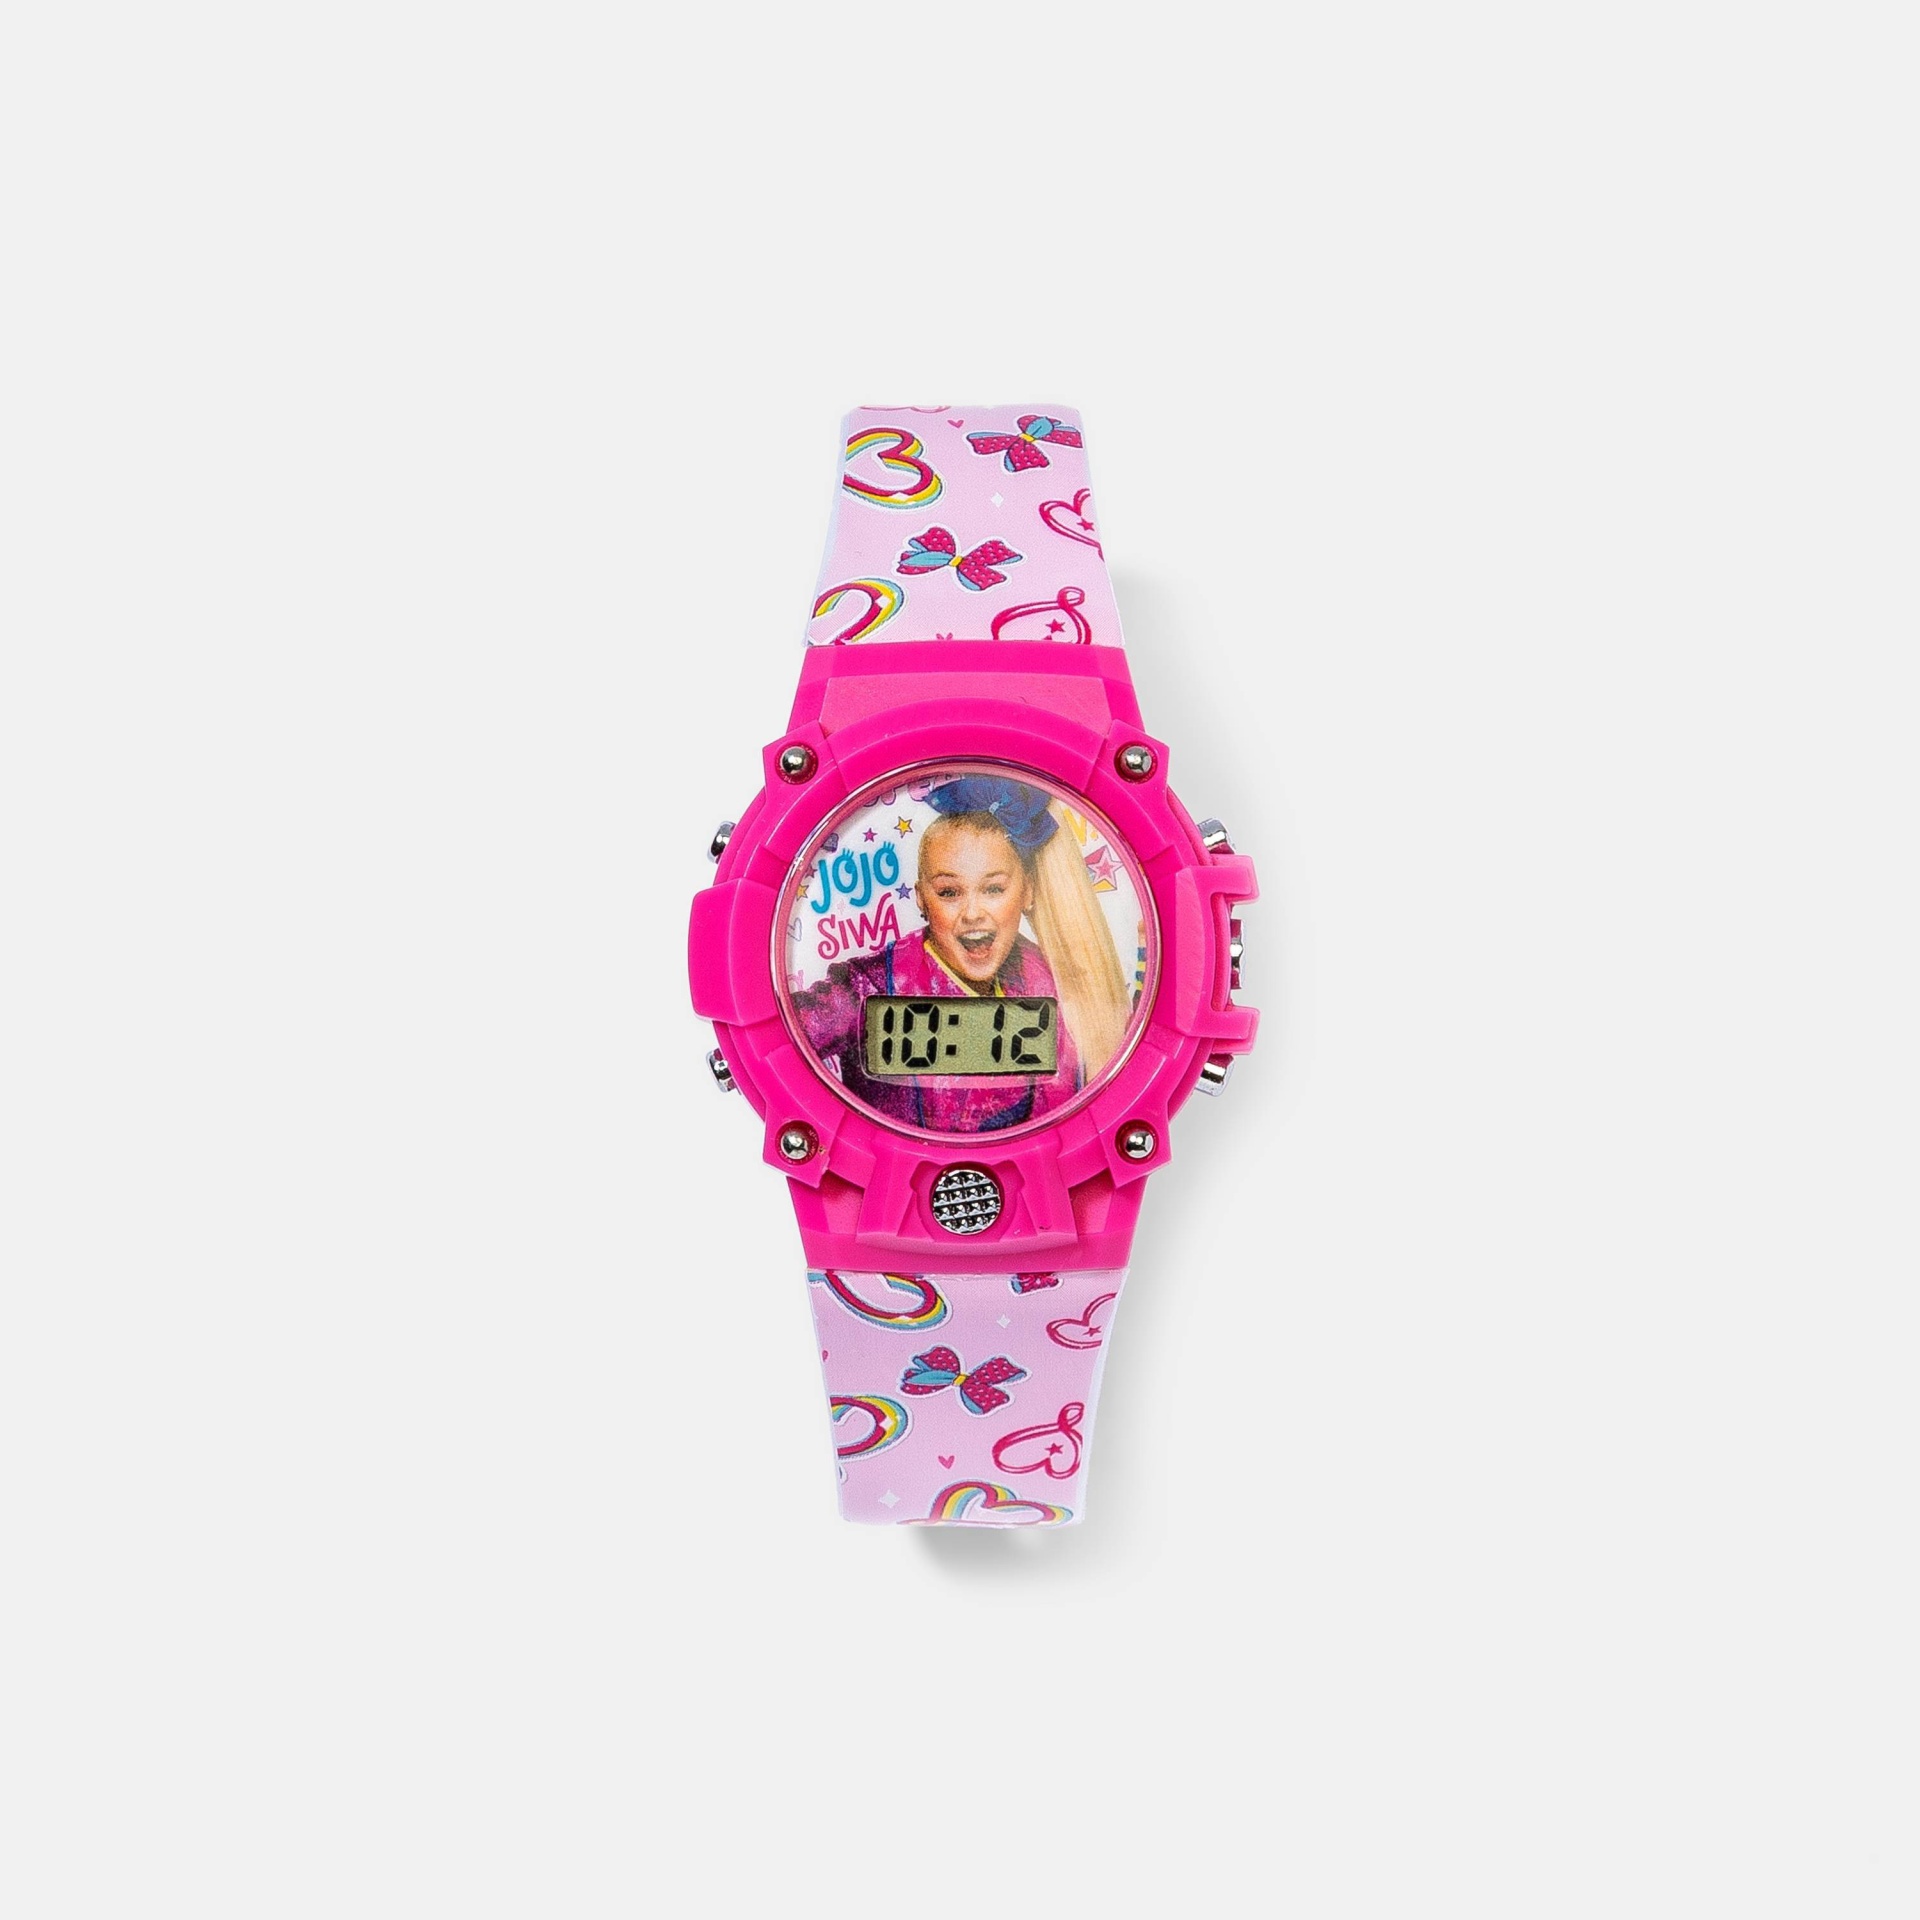 Nickelodeon Girl's Quartz Plastic and Rubber Casual Watch, Color:Pink  (Model: PAW4017) : Amazon.in: Watches